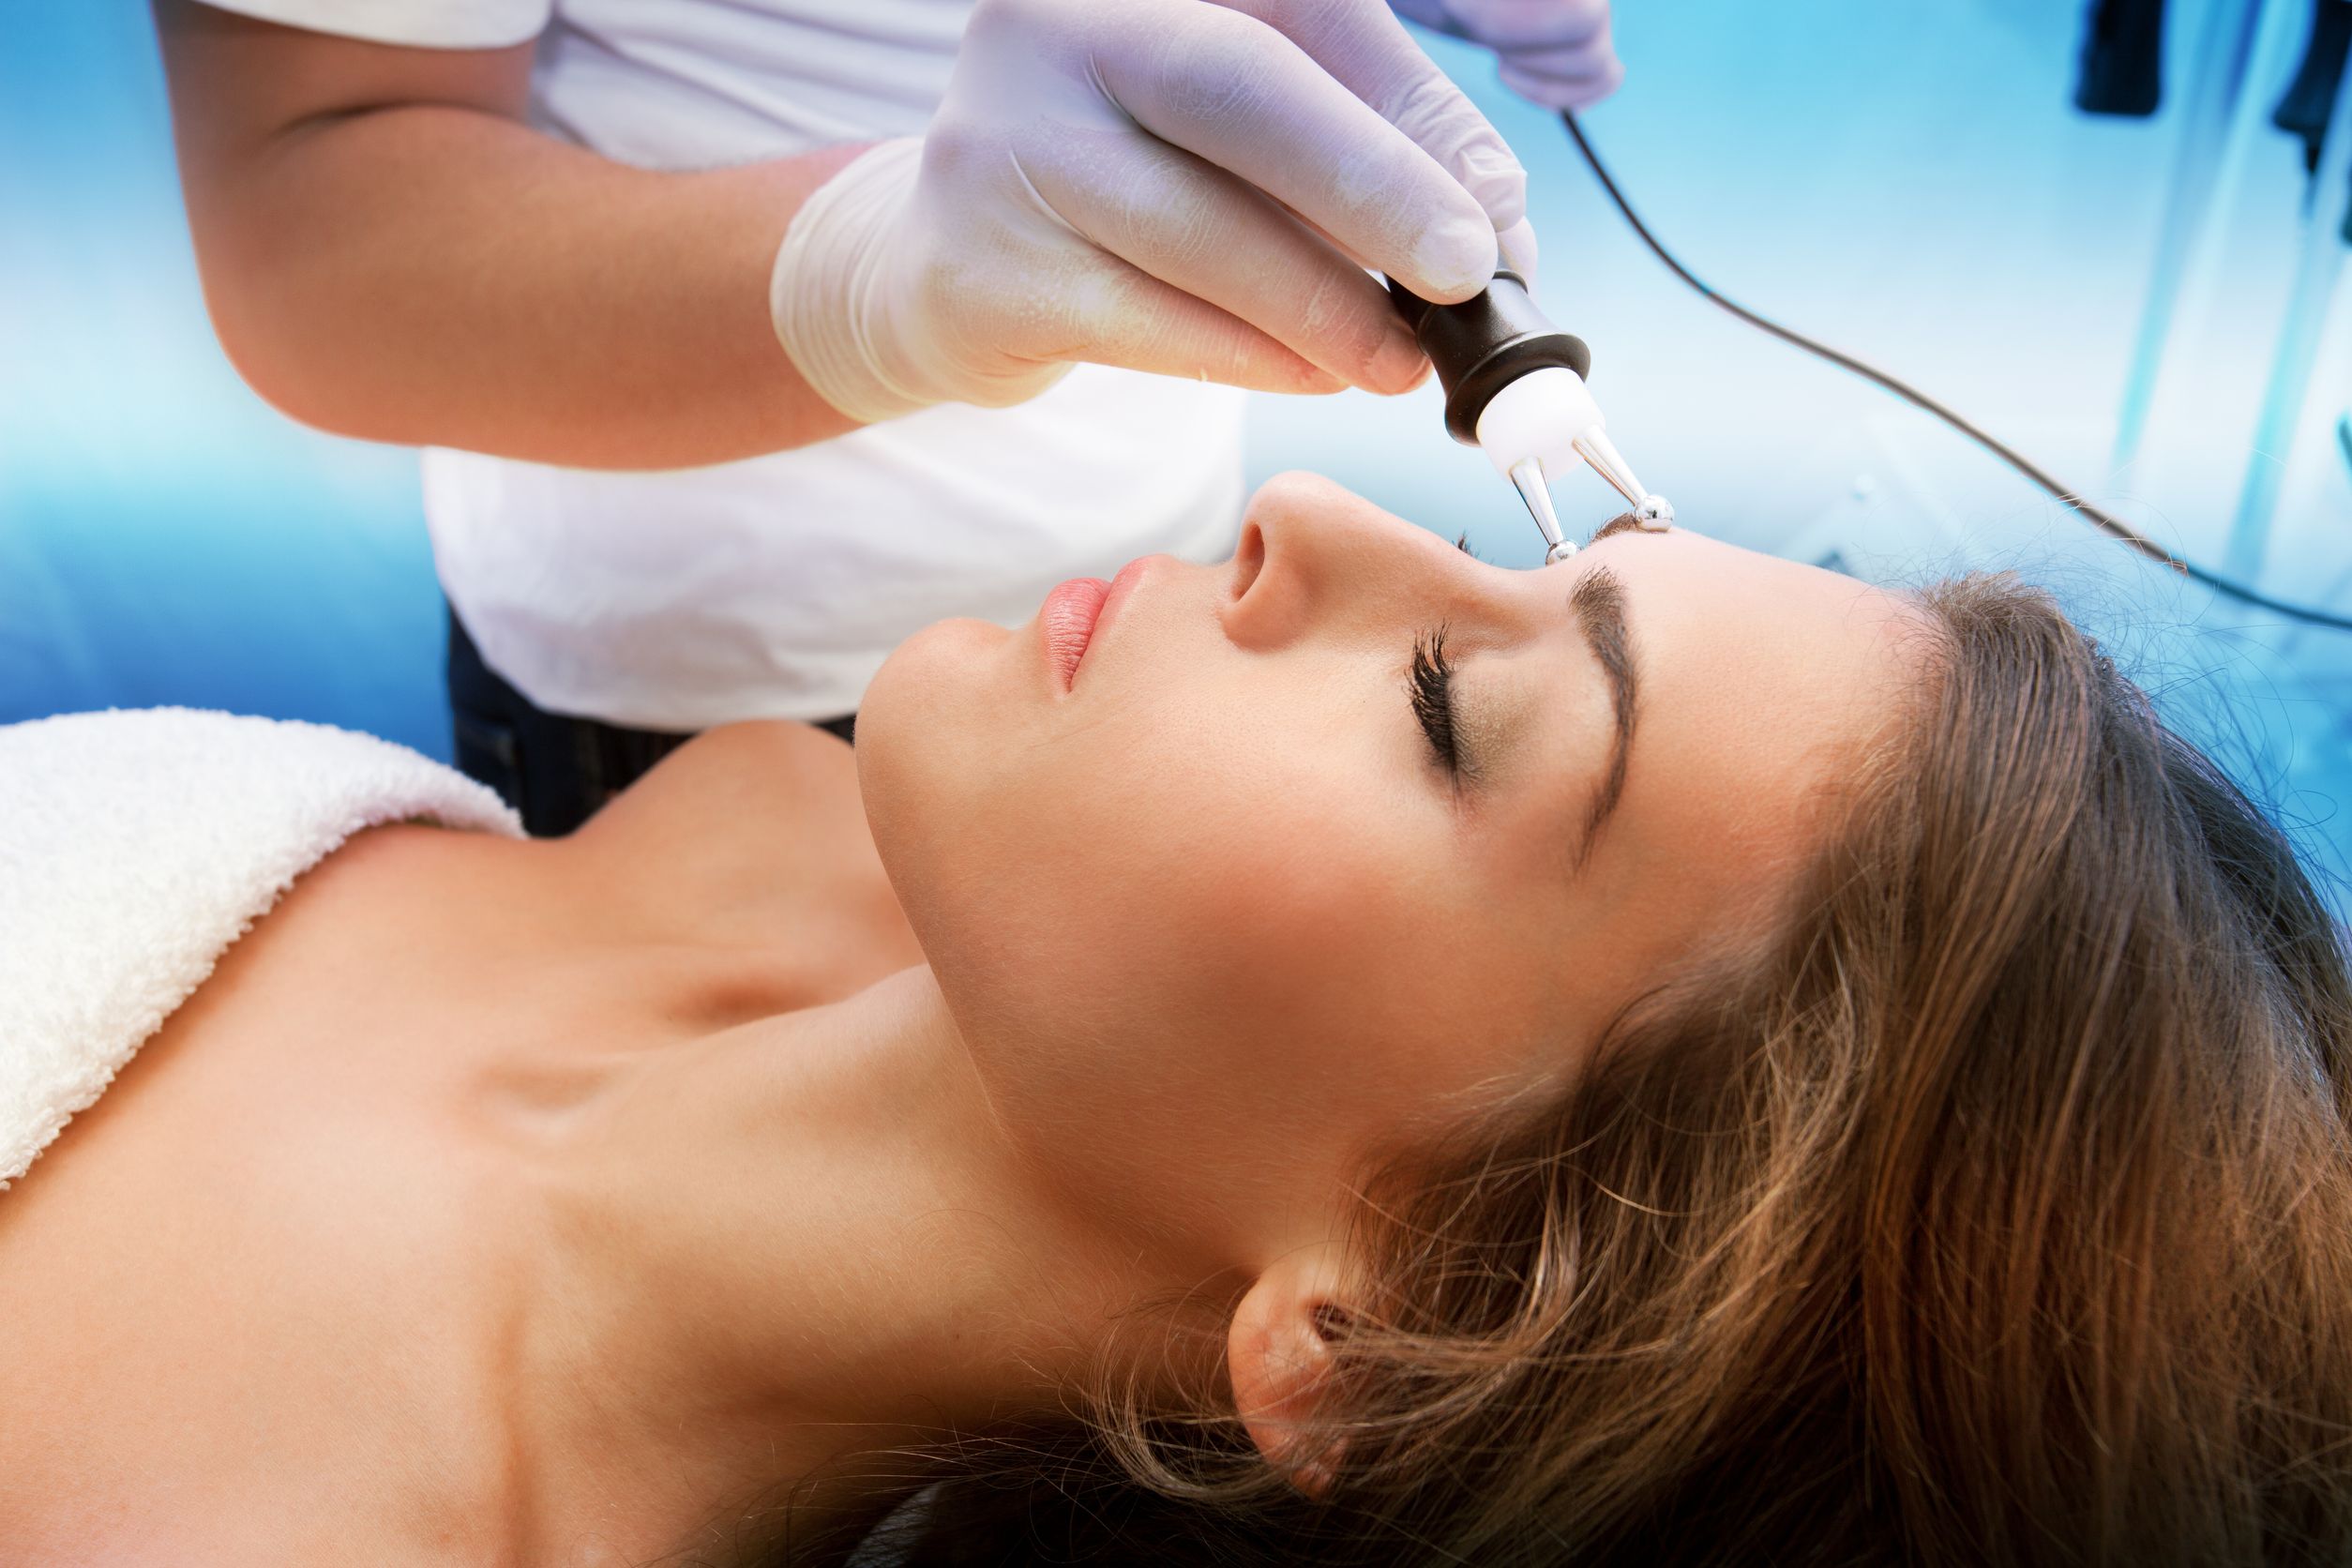 What You Can Expect to Learn in a Microneedling Class